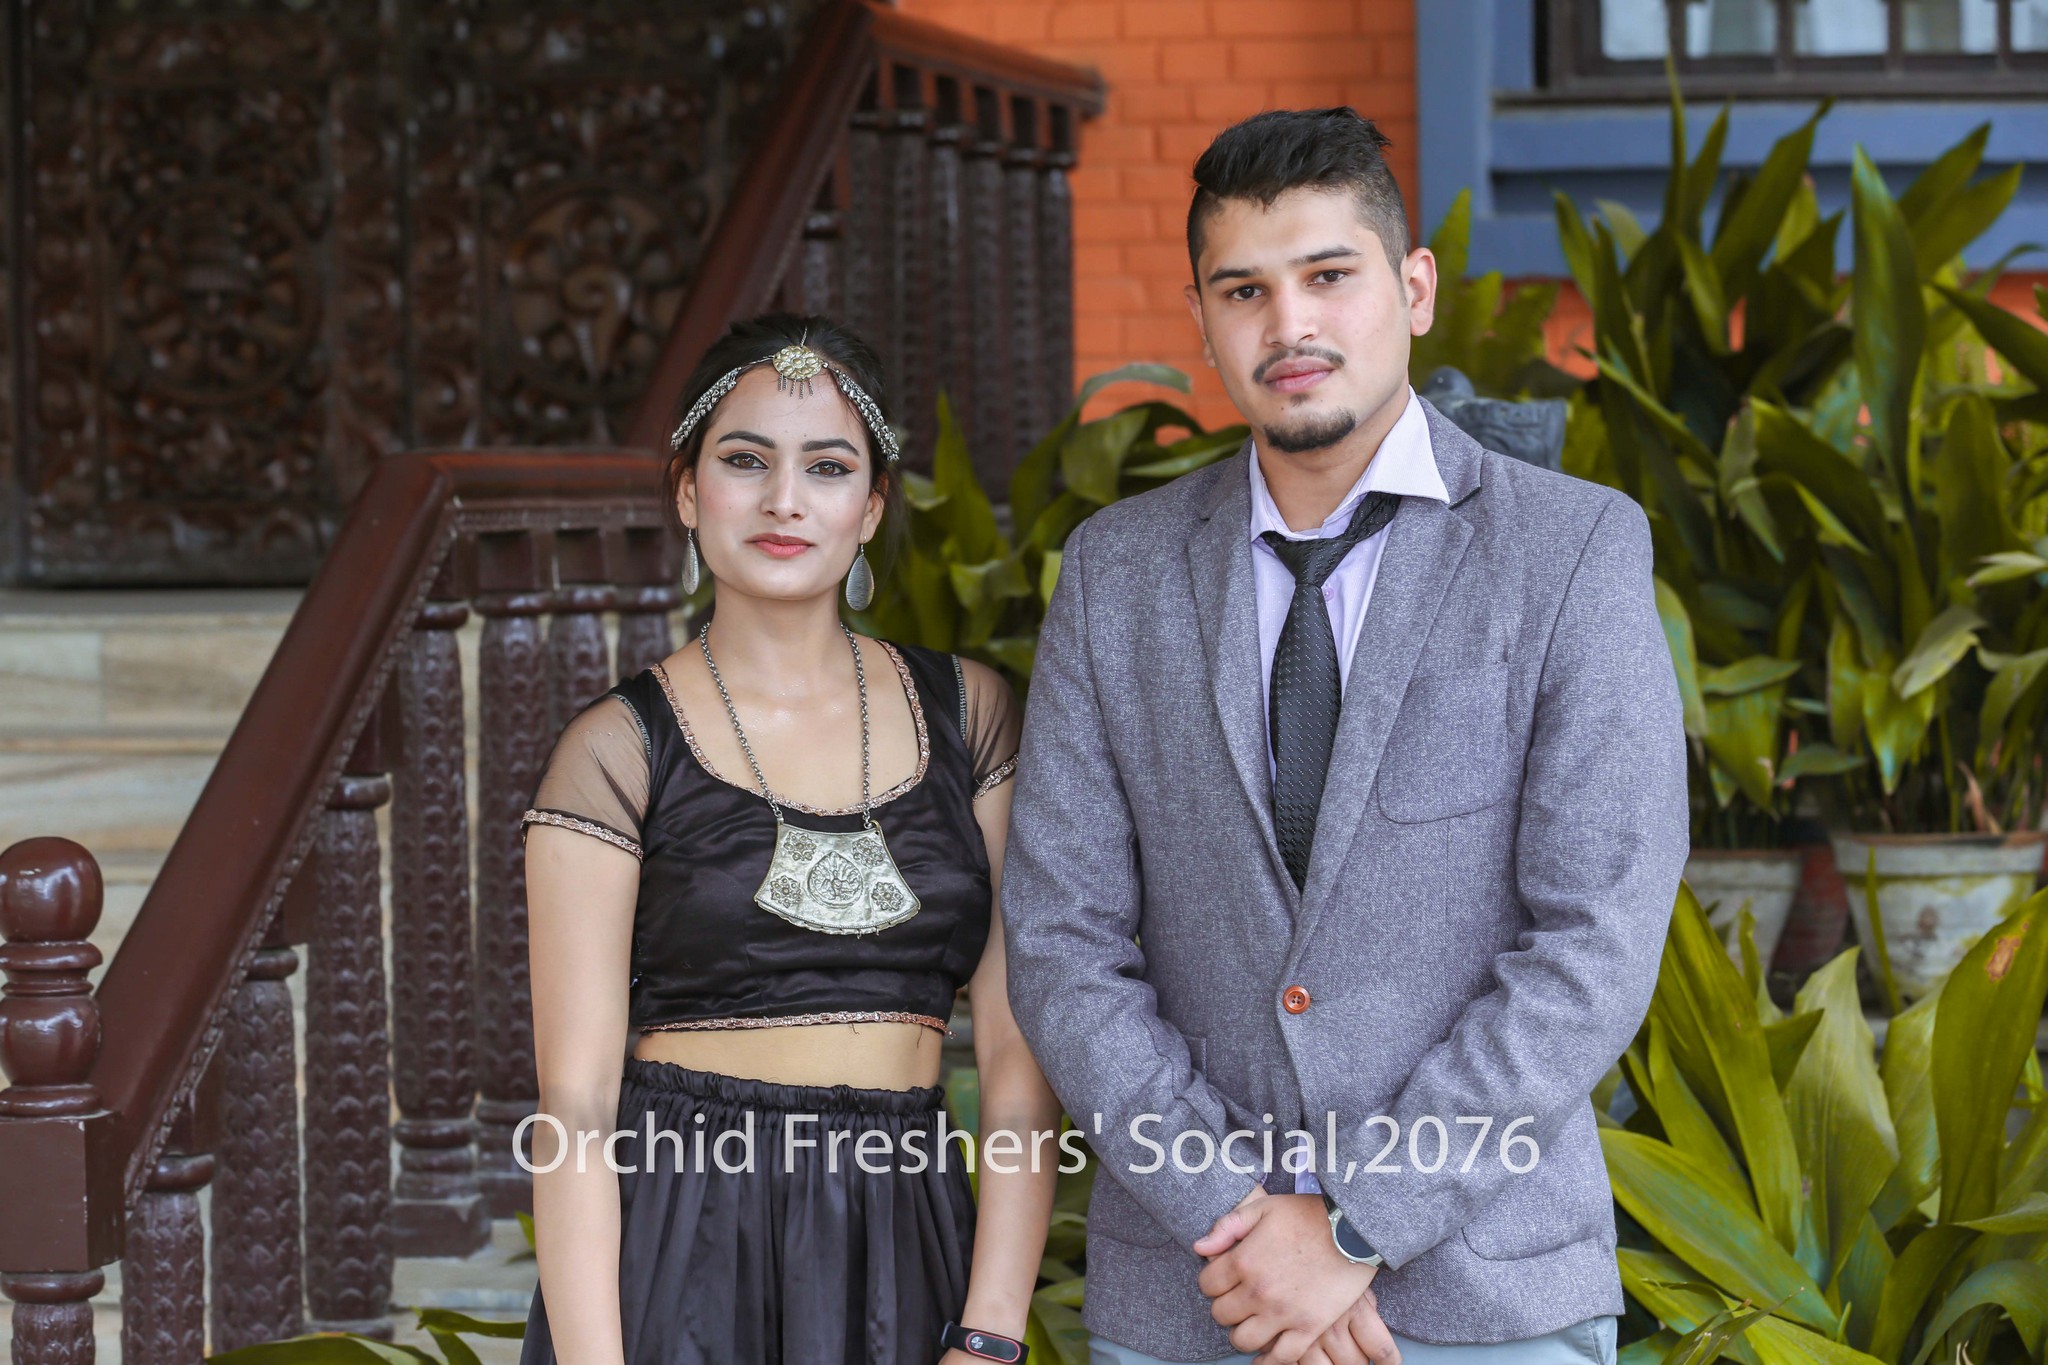 Orchid Fresher Social 2076 003